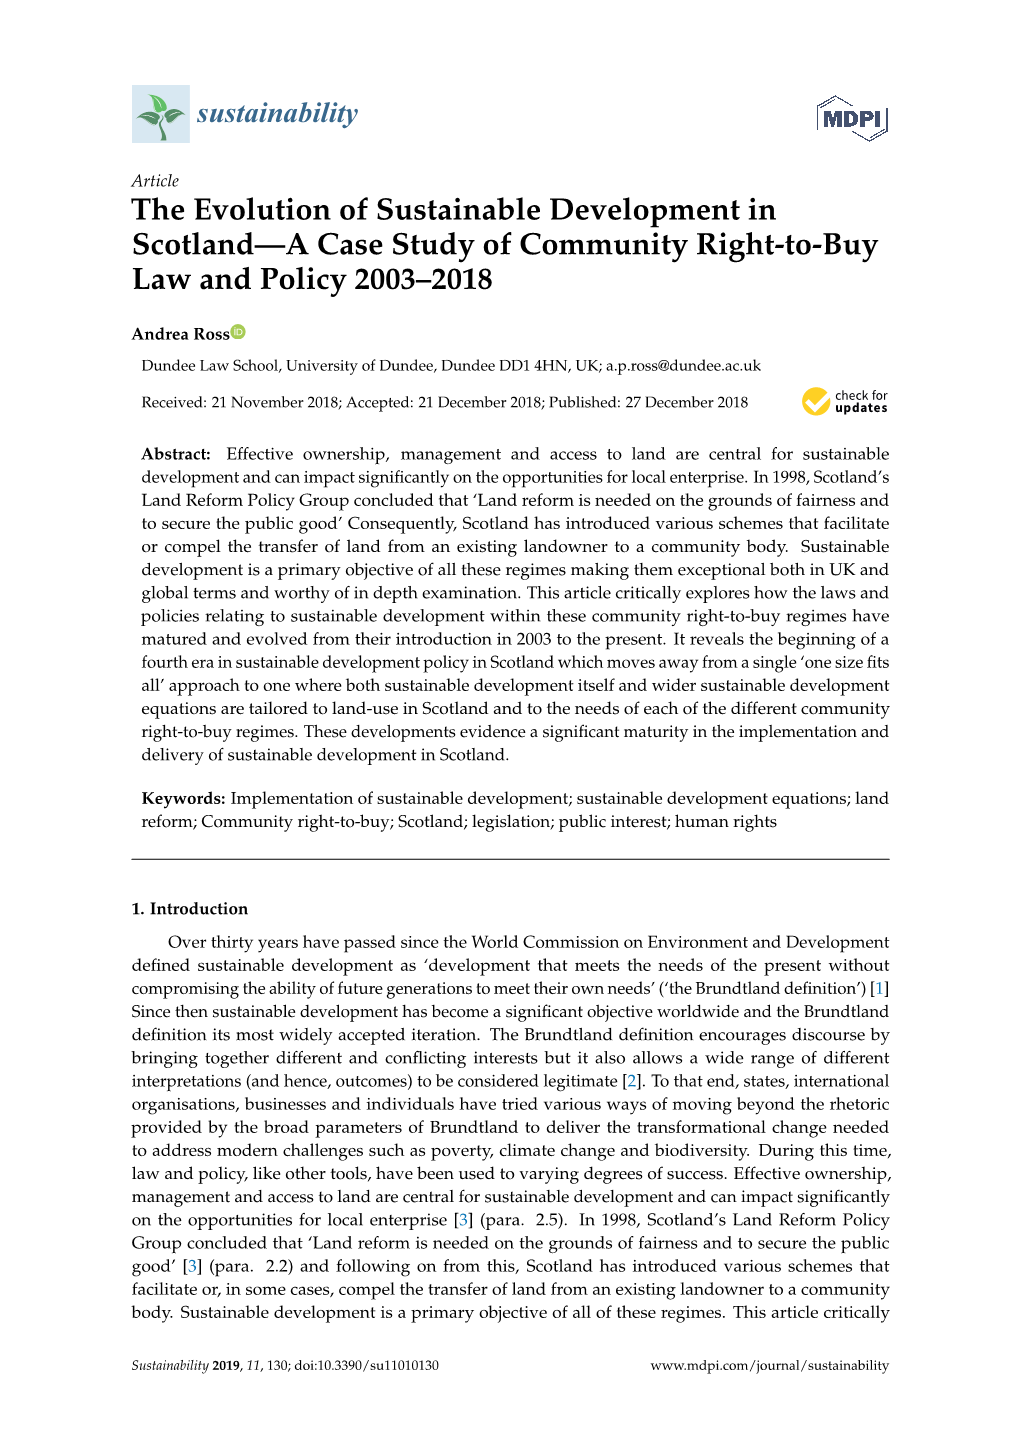 The Evolution of Sustainable Development in Scotland—A Case Study of Community Right-To-Buy Law and Policy 2003–2018